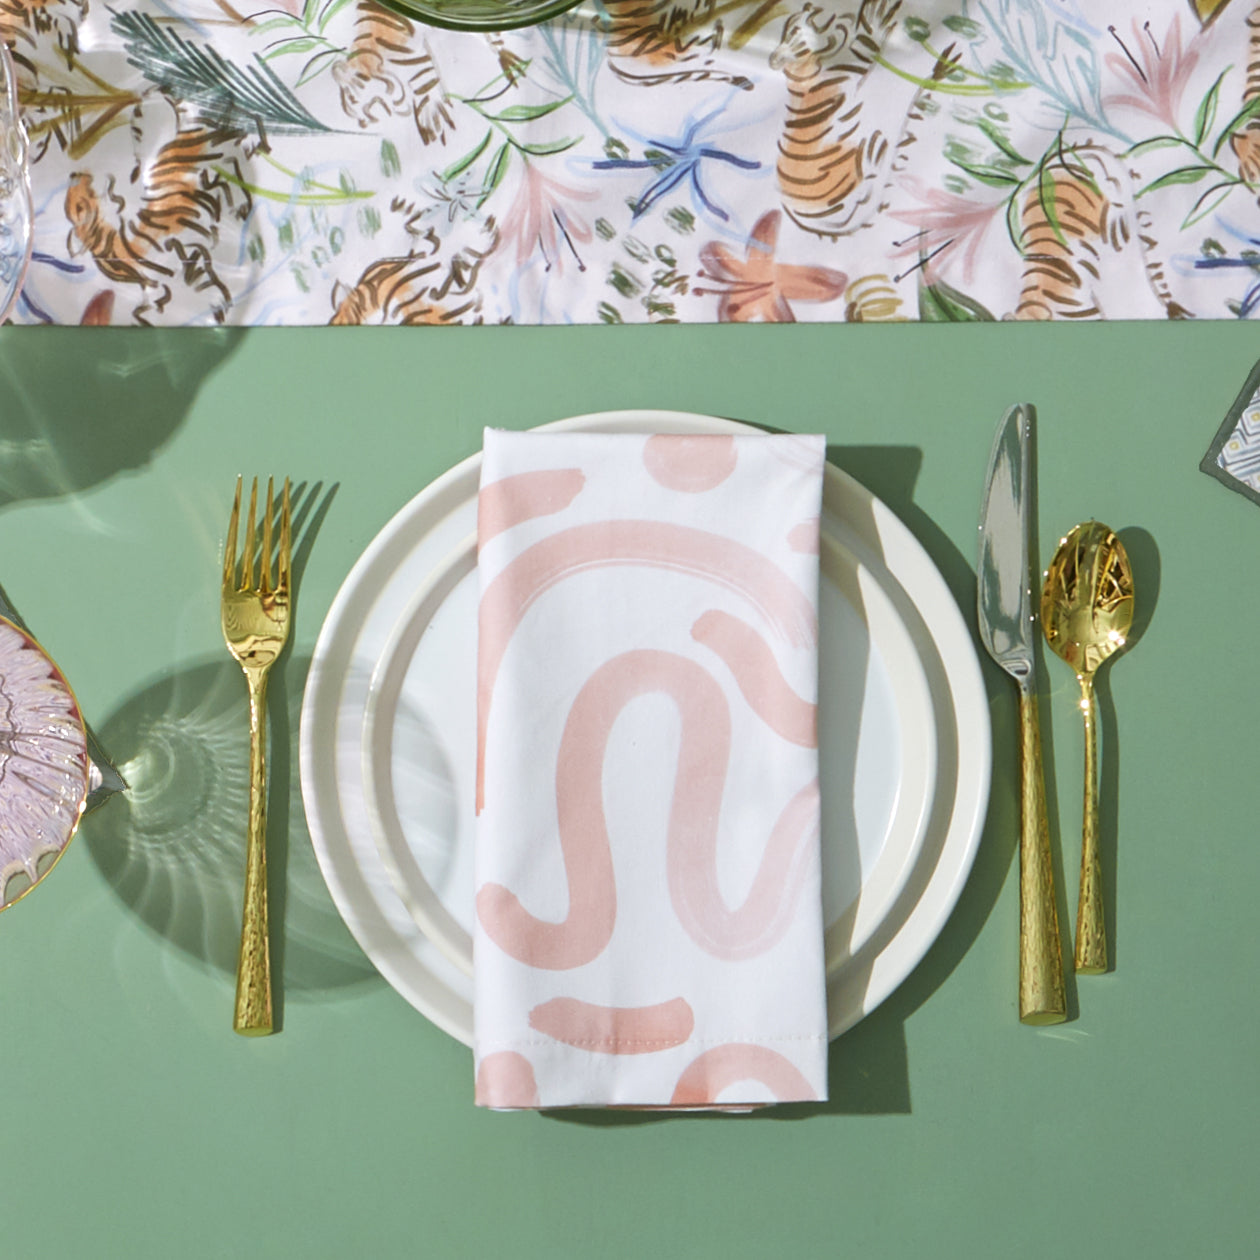 Table Setting Close-Up of White plates with Pink Graphic Printed Napkin and gold silverware by Pink Chinoiserie Tiger Printed runner 